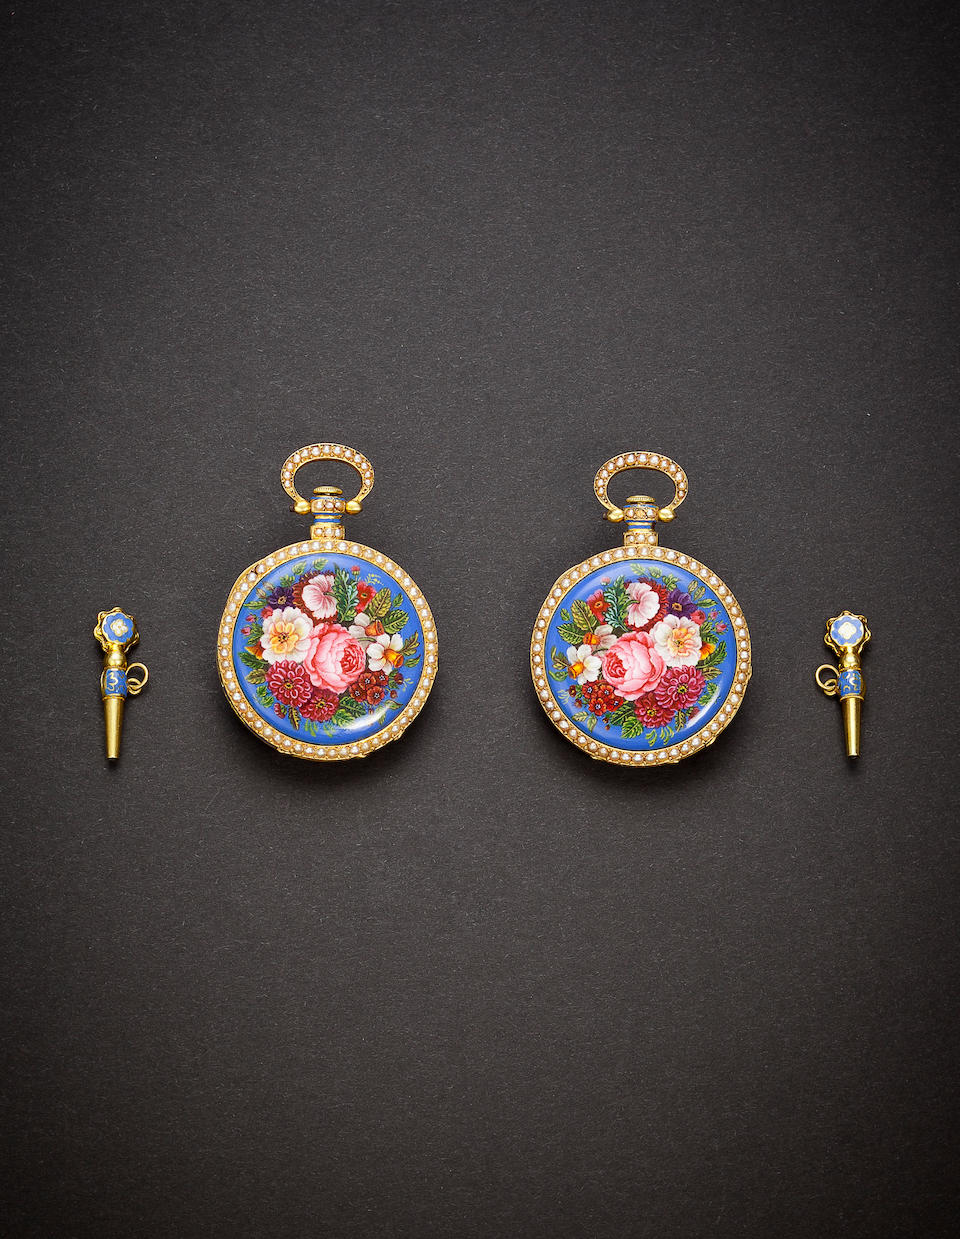 Boyer &#224; Gen&#232;ve. A fine and very rare mirror image pair of floral enameled 18K gold watches in original box with enameled keysNos. 9899 and 9900, circa 1850